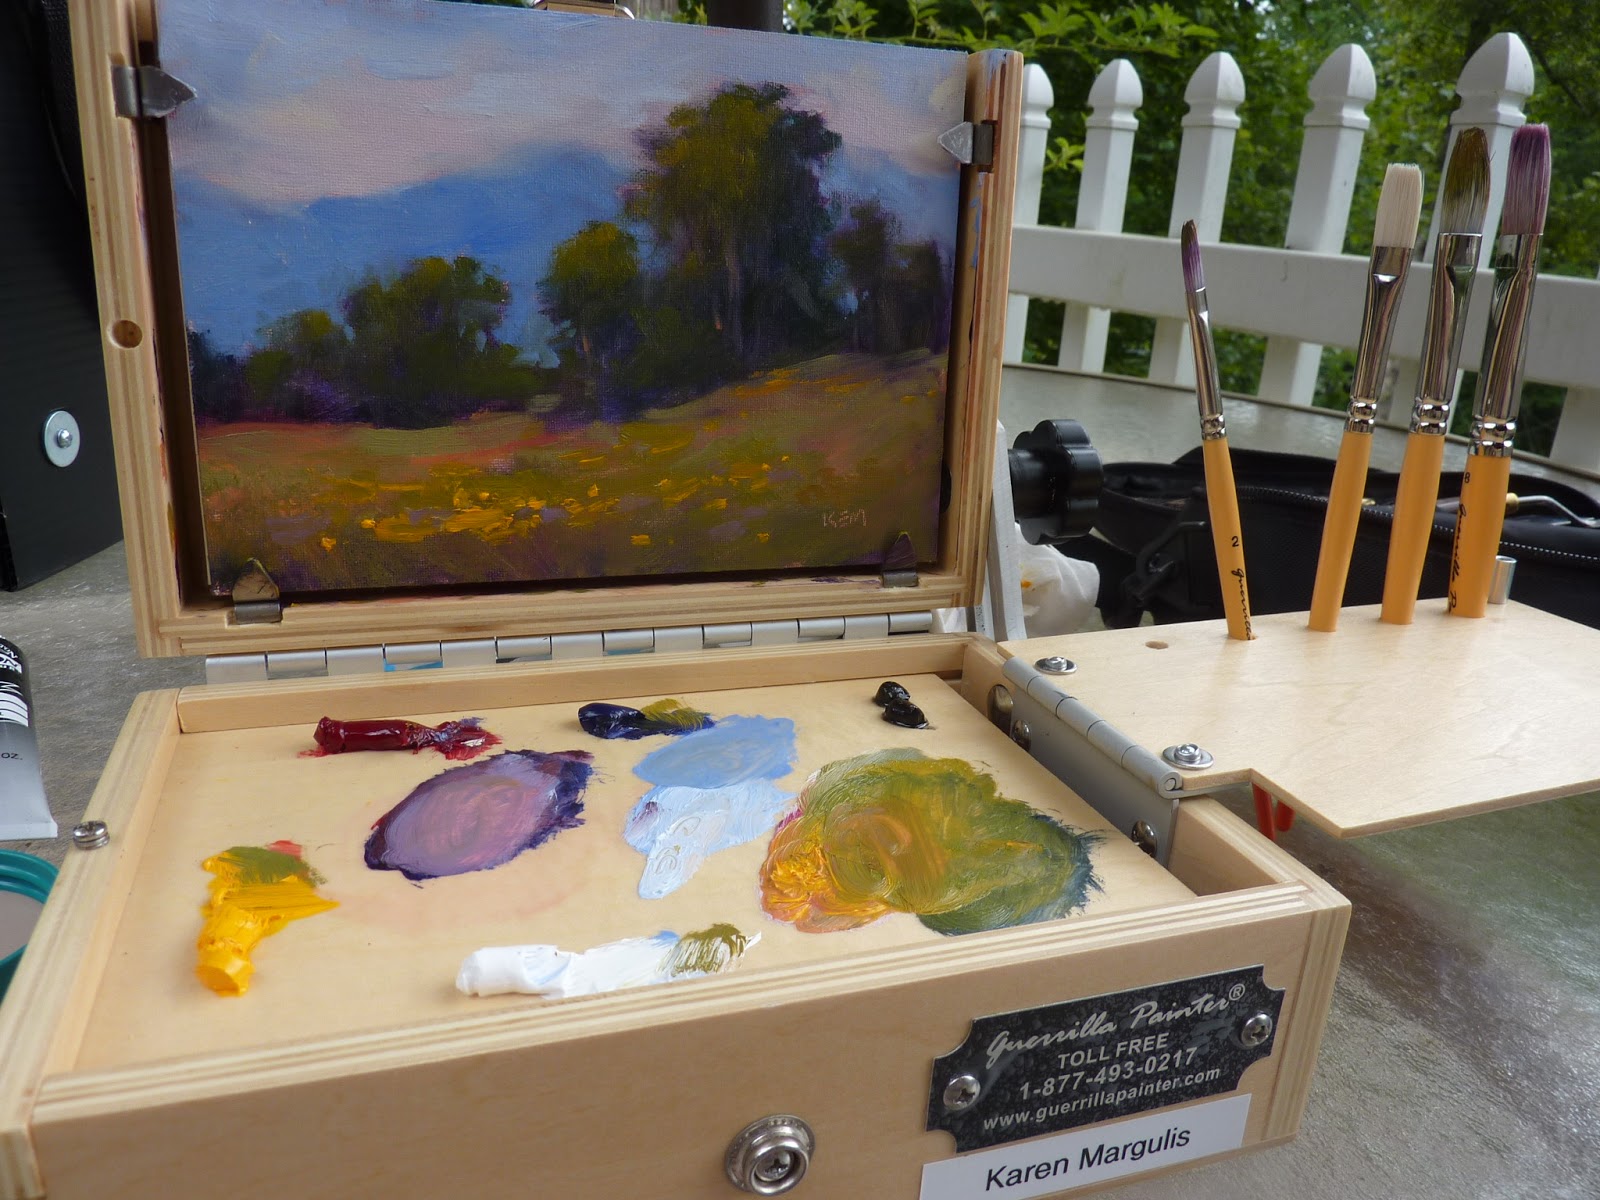 Falling in Art Acrylic Painting Set with Tabletop Easel - Judsons Art  Outfitters